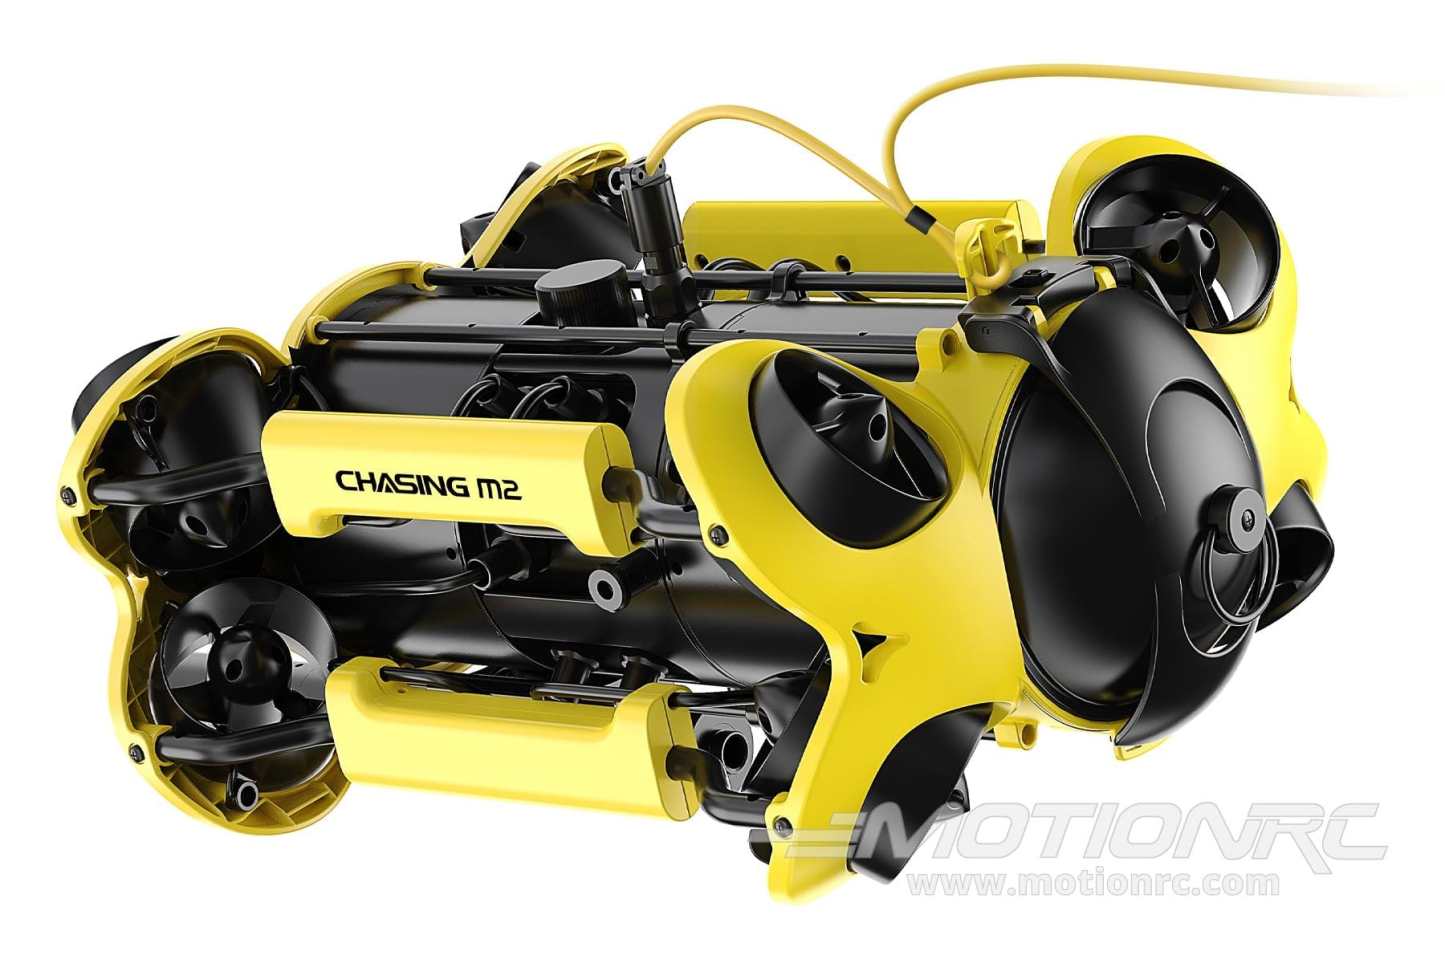 Chasing M2 Professional Submersible ROV with 200M Tether, Manual Reel, Grabber Claw, Trolley Case and 4K Video - RTR